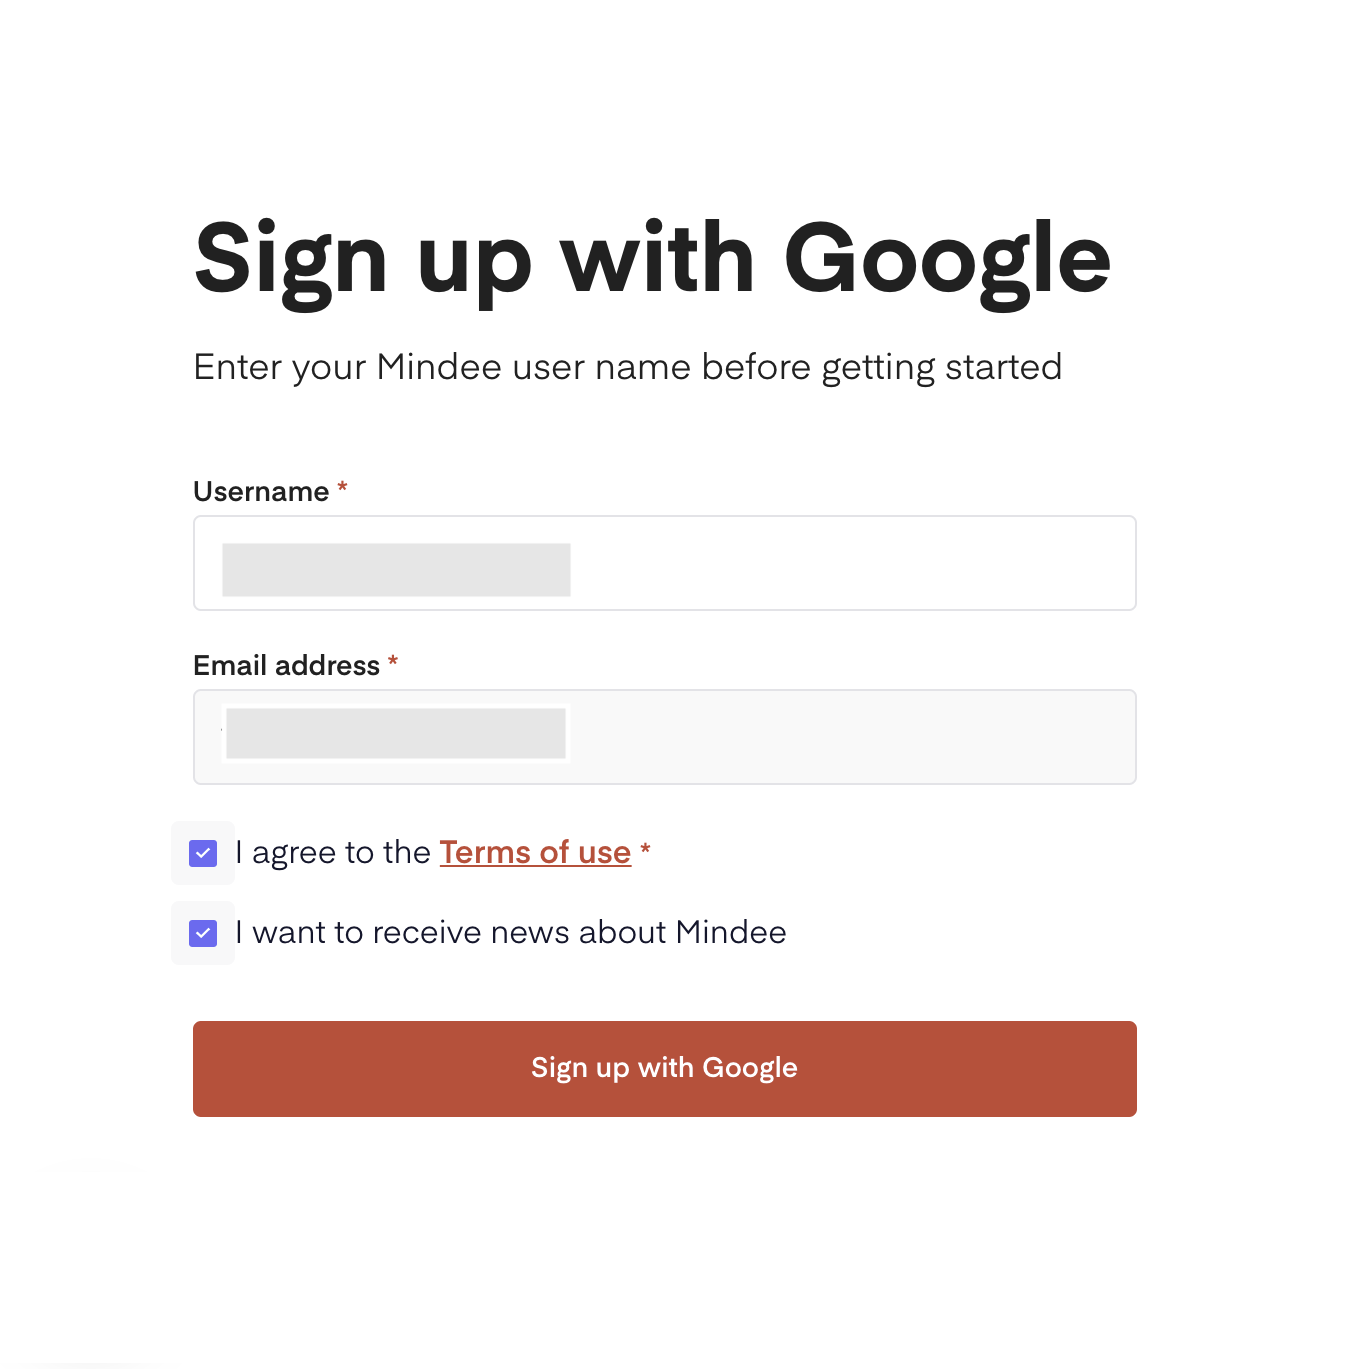 Sign up with google page with the desired field to fill to create an account